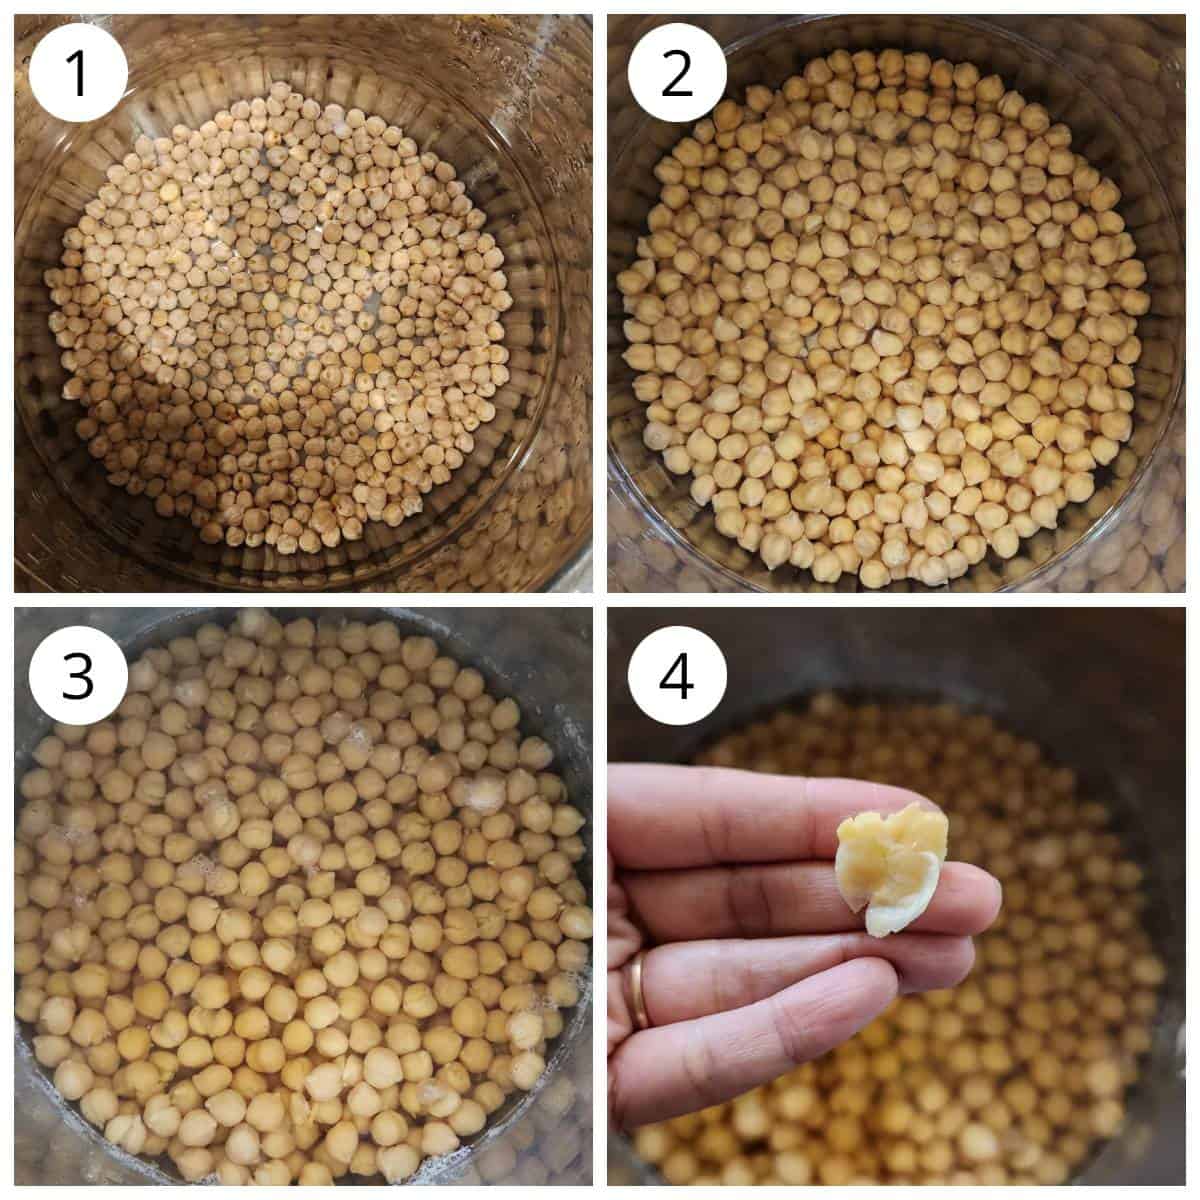 Steps showing how to cook chickpeas for salad in Instant Pot